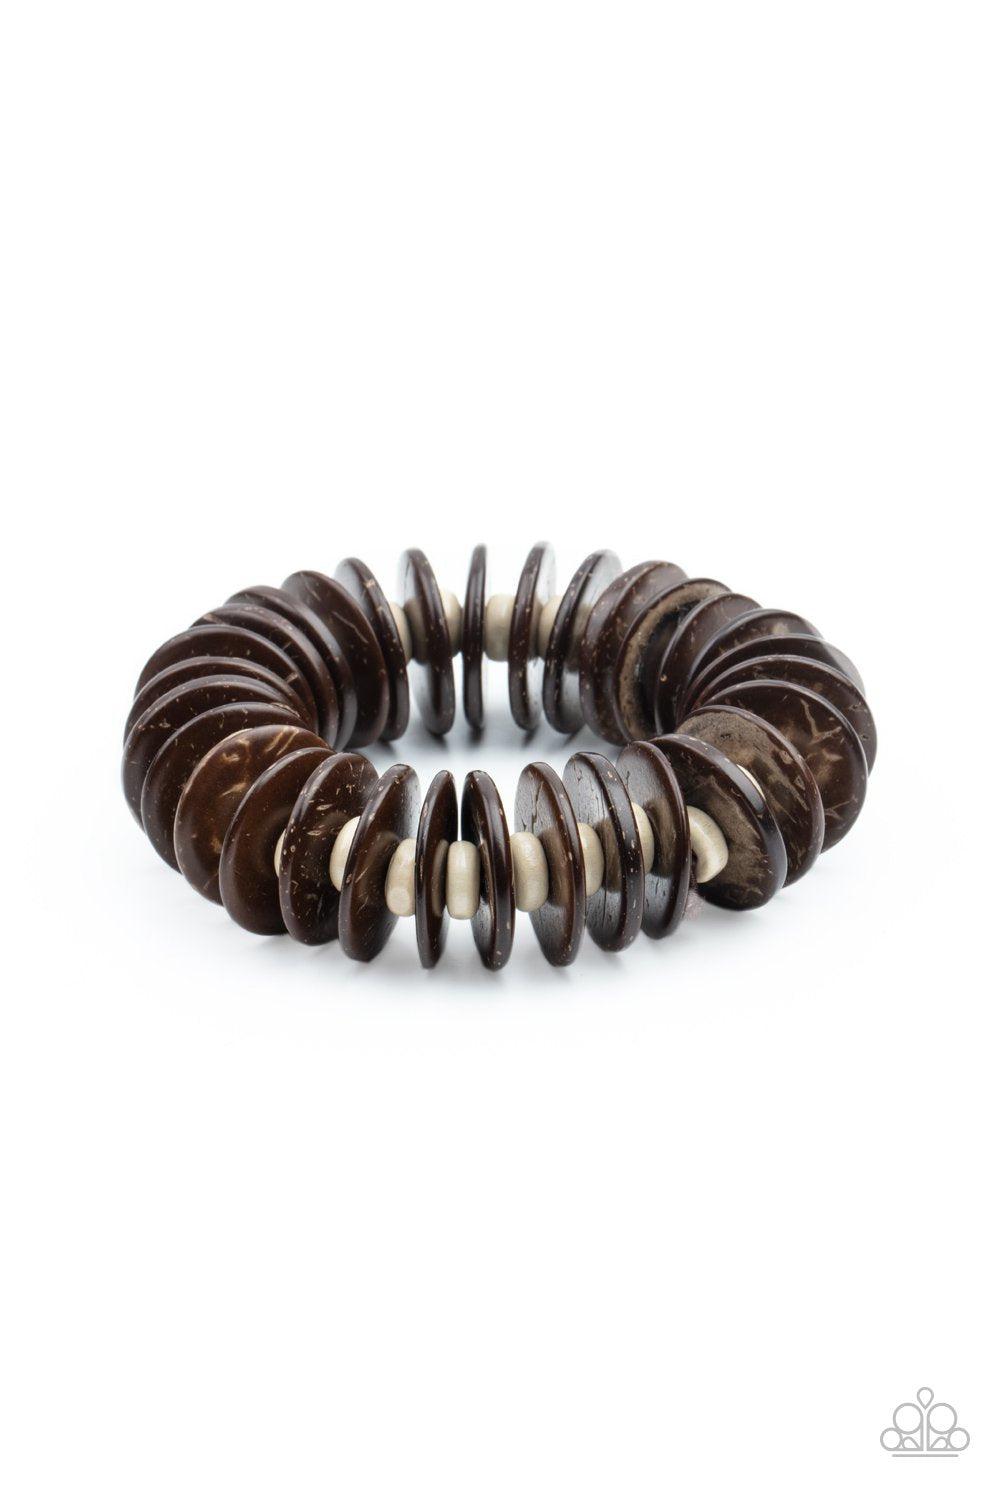 Caribbean Reefs Brown and White Wood Bracelet - Paparazzi Accessories- lightbox - CarasShop.com - $5 Jewelry by Cara Jewels